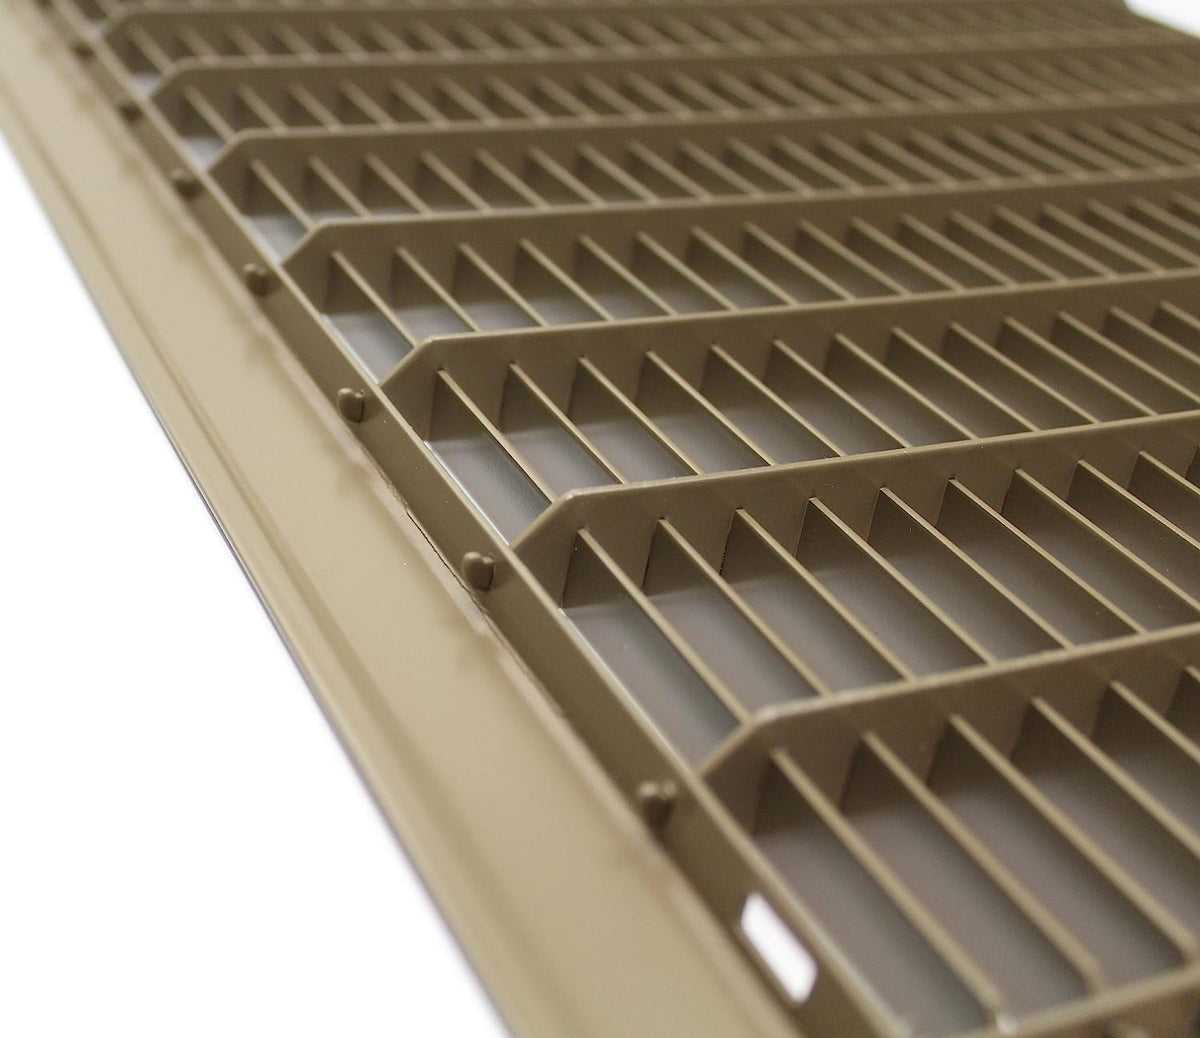 12&quot; X 30&quot; or 30&quot; X 12&quot; Heavy Duty Floor Grille - Fixed Blades Air Grille - Brown [Outer Dimensions: 13.75 X 31.75]